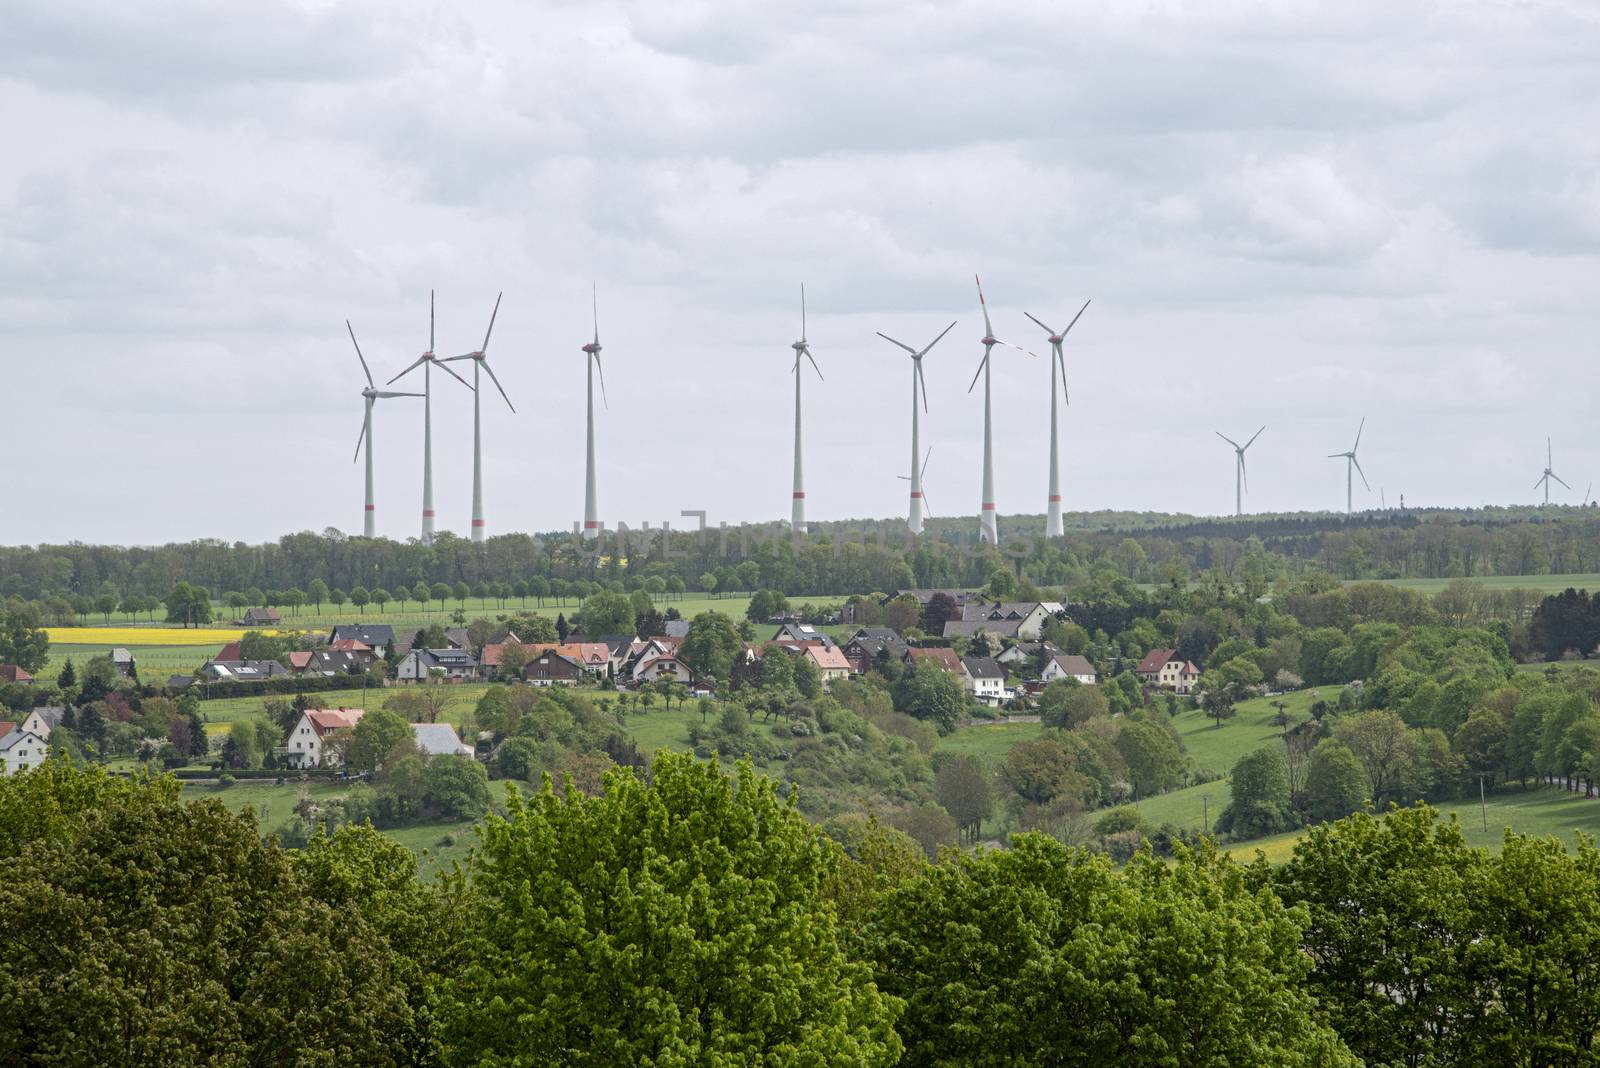 DE, North Rhine-Westphalia - April 2018: Cluster of Wind turbines or power windmills over the Germany country side